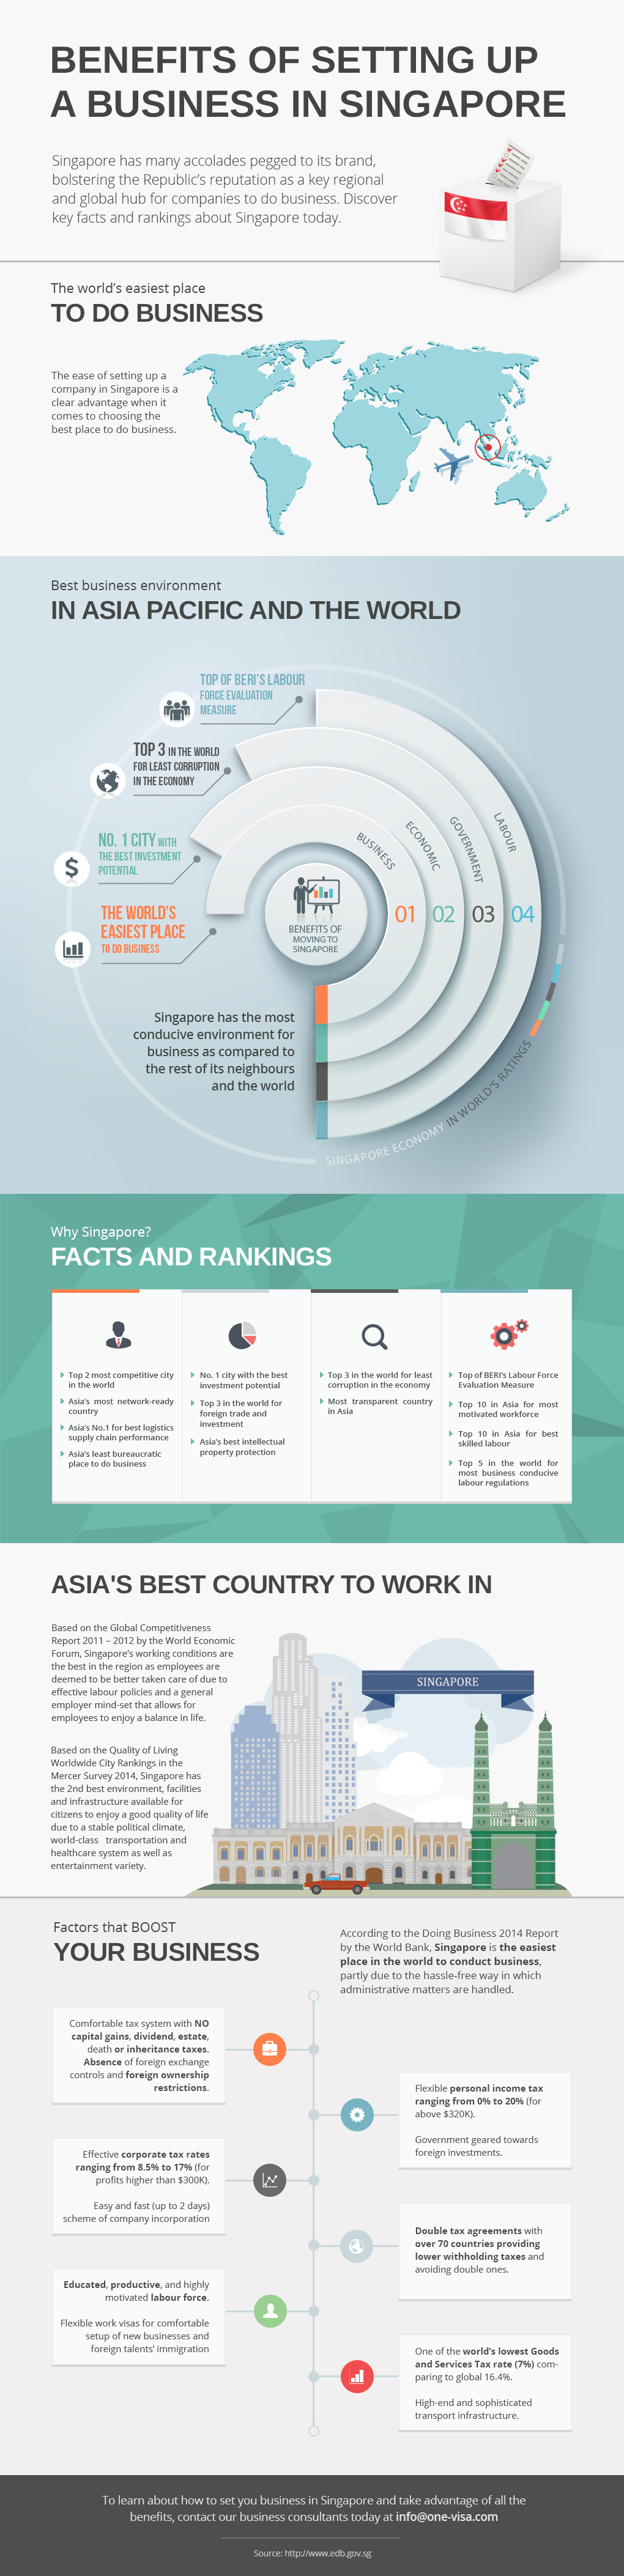 Benefits of Setting up a Business in Singapore